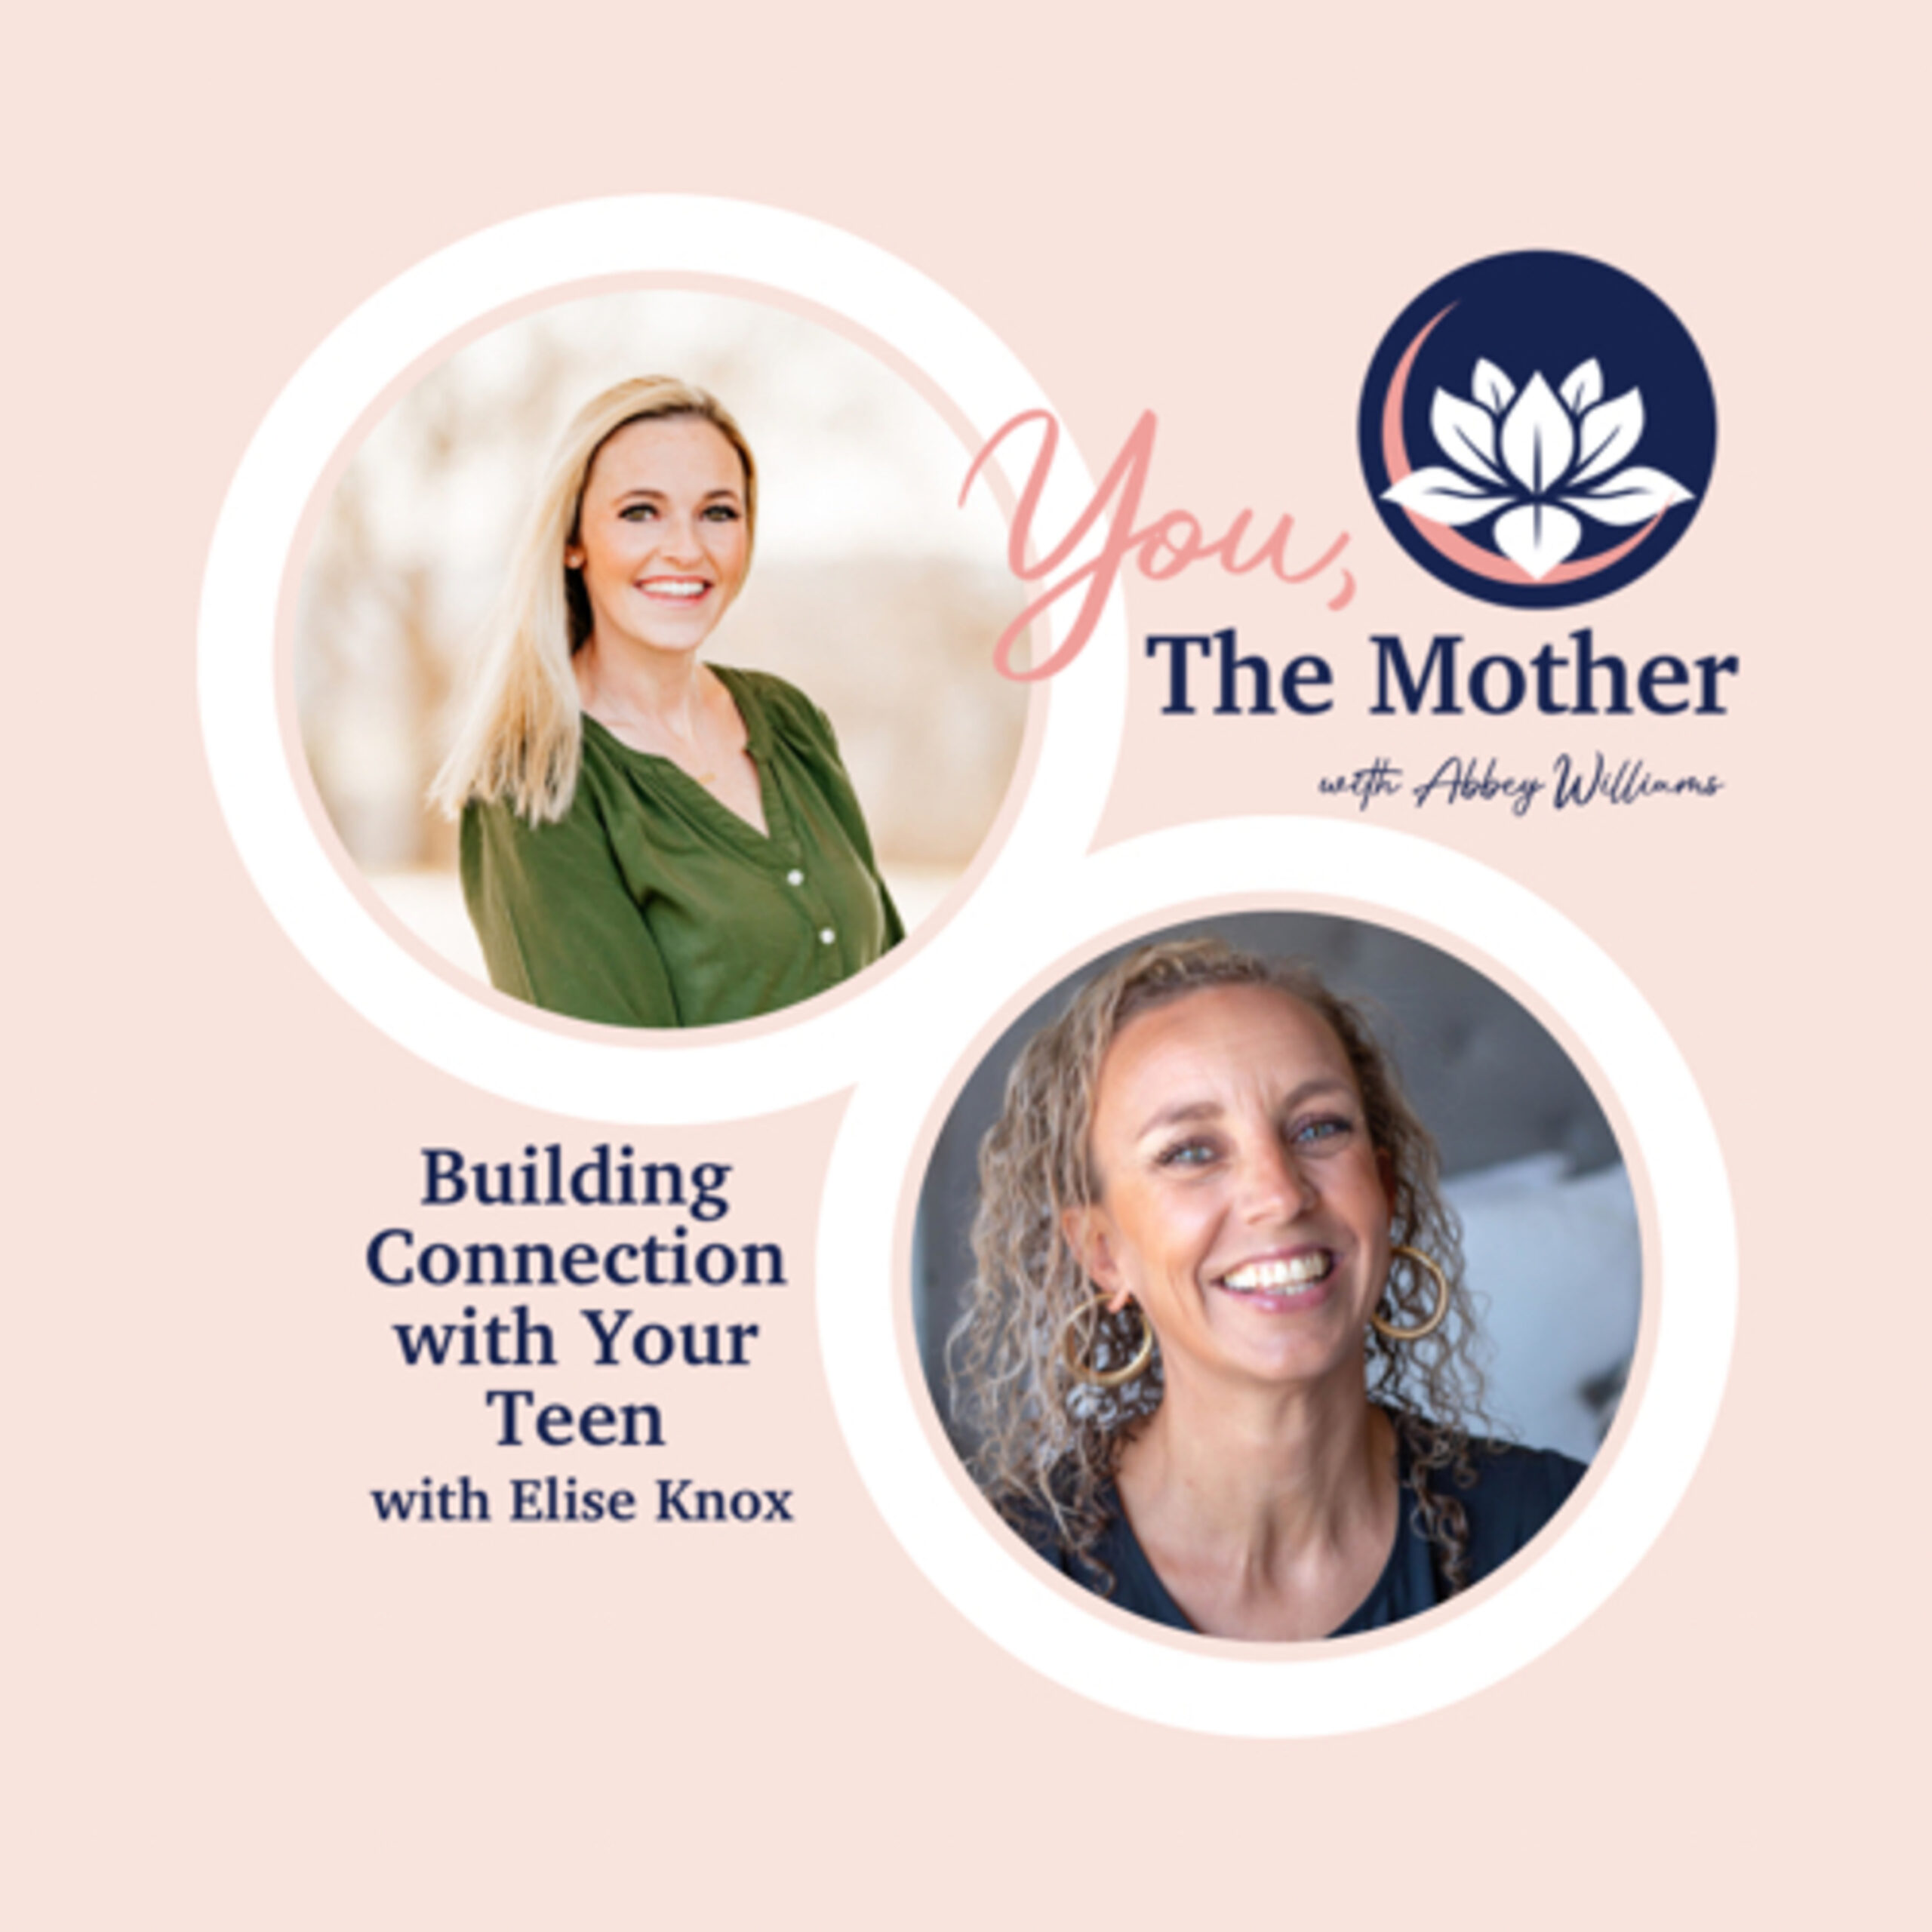 Building Connection with Your Teen with Elise Knox